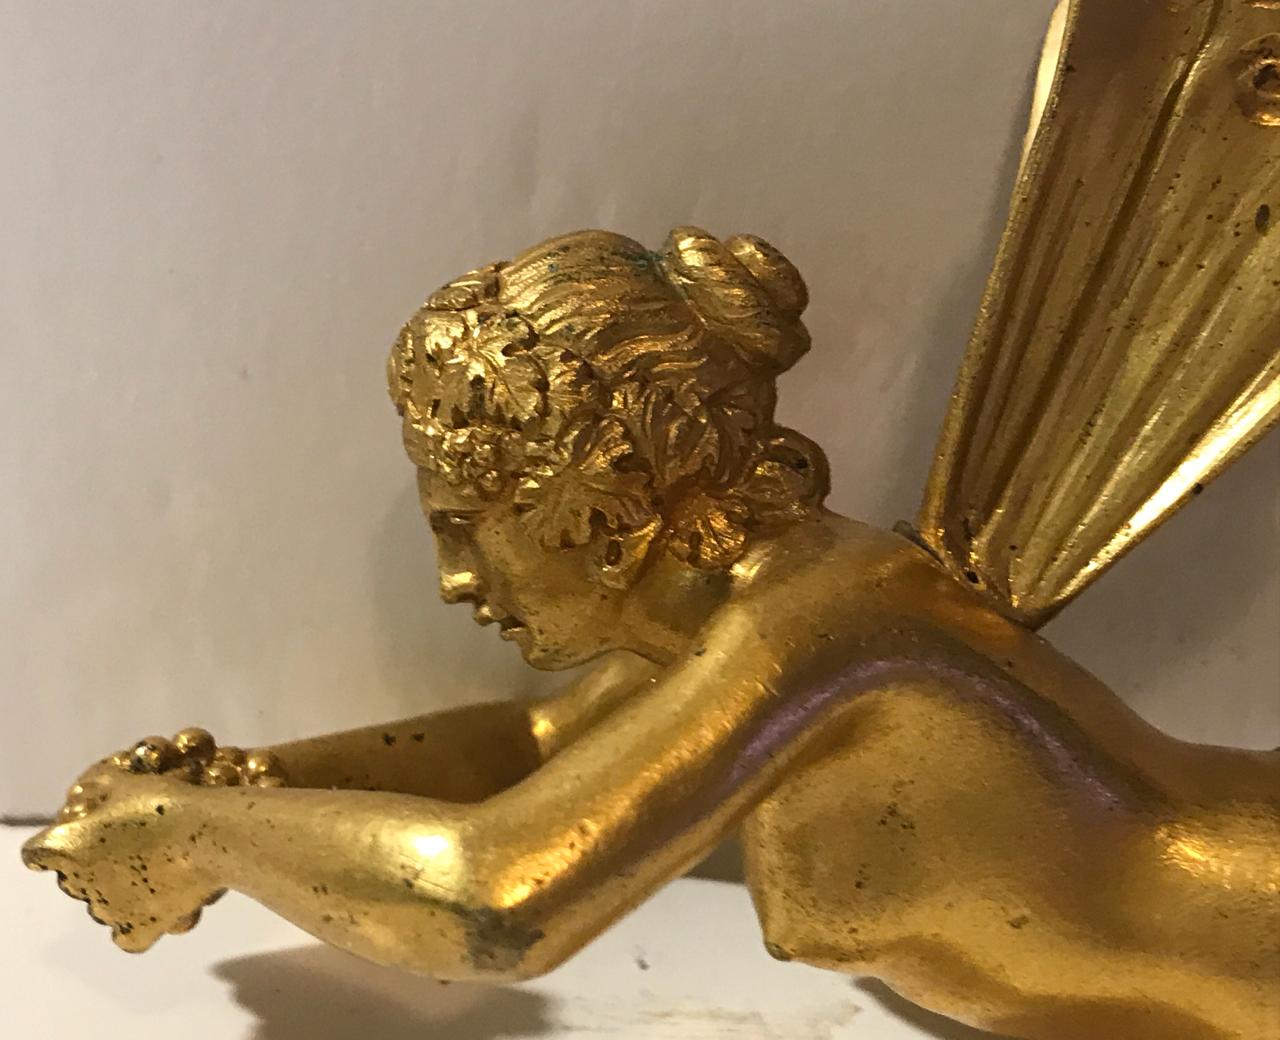 French rare antique ewer handle in the shape of a winged mermaid carrying grapes.  Designed by Hyacinthe-Prosper Bourg French 19c. The ewer with the same handle sold at Christie's Paris November 17, 2020 Lot #31 for  EUR 15,000 .  You can check this